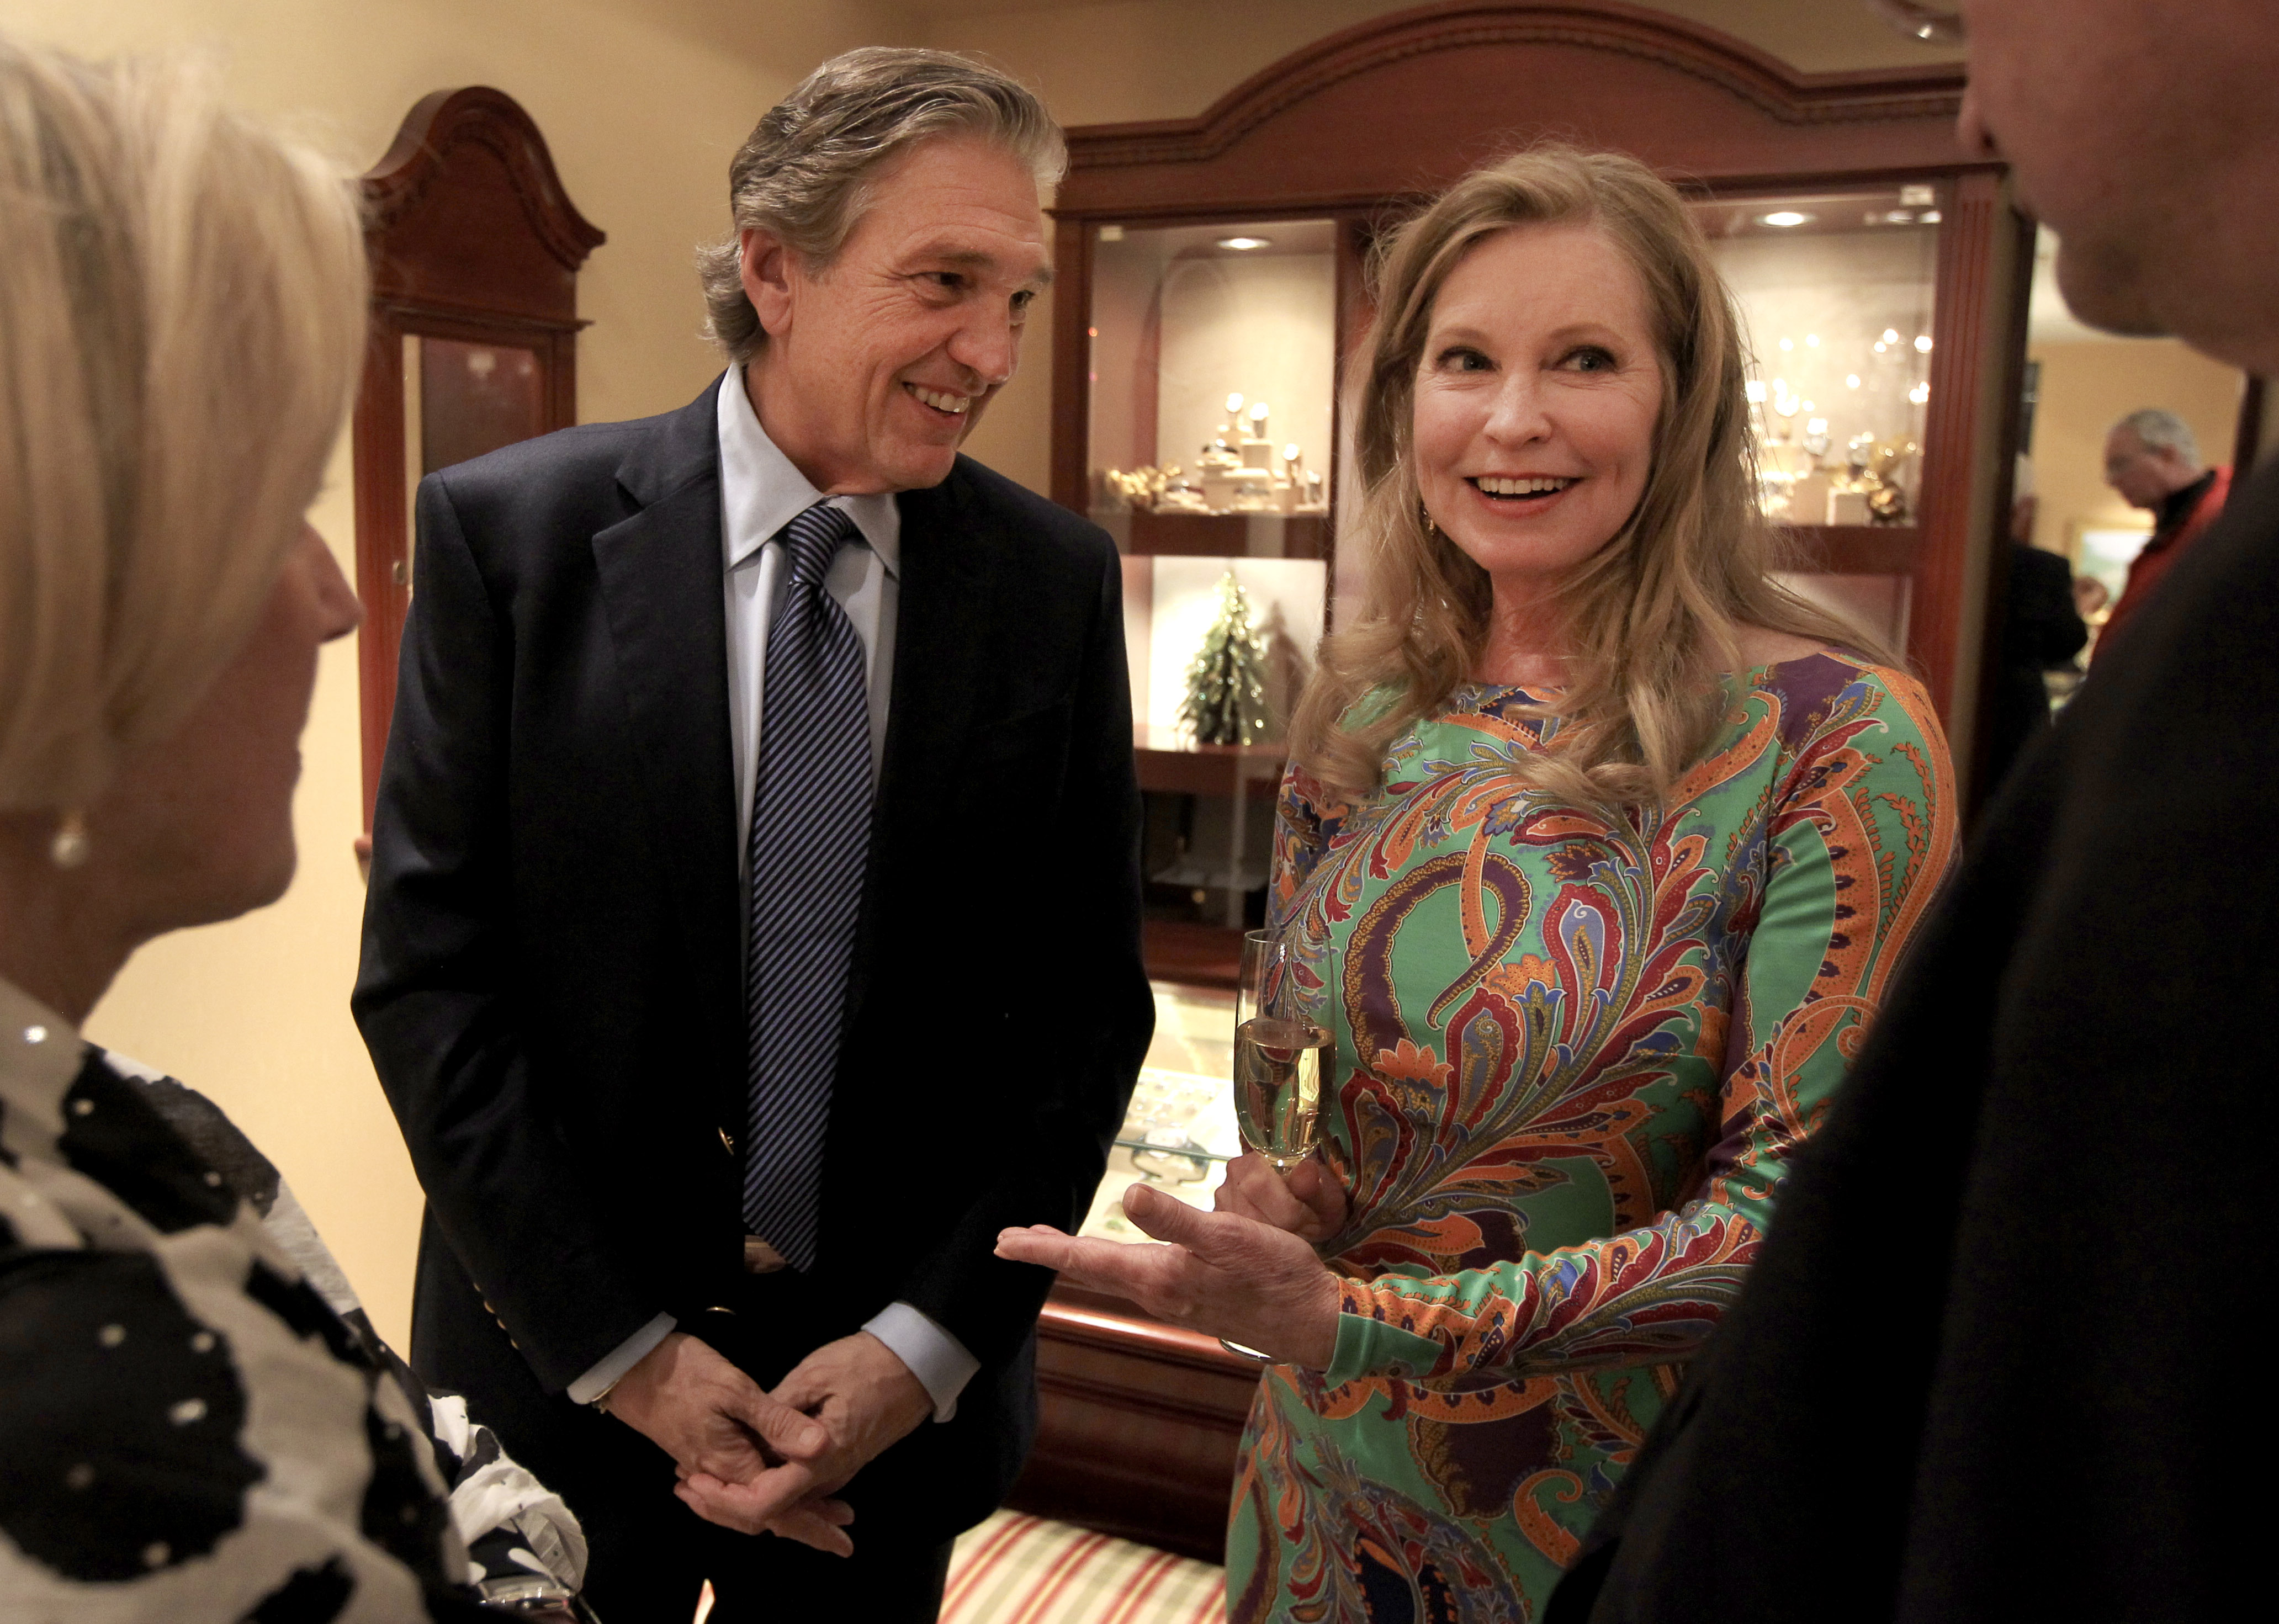 Albert DePrisco and Lisa Niemi at at a book signing event at DePrisco Jewelers in Wellesley on November 30, 2013 | Source: Getty Images